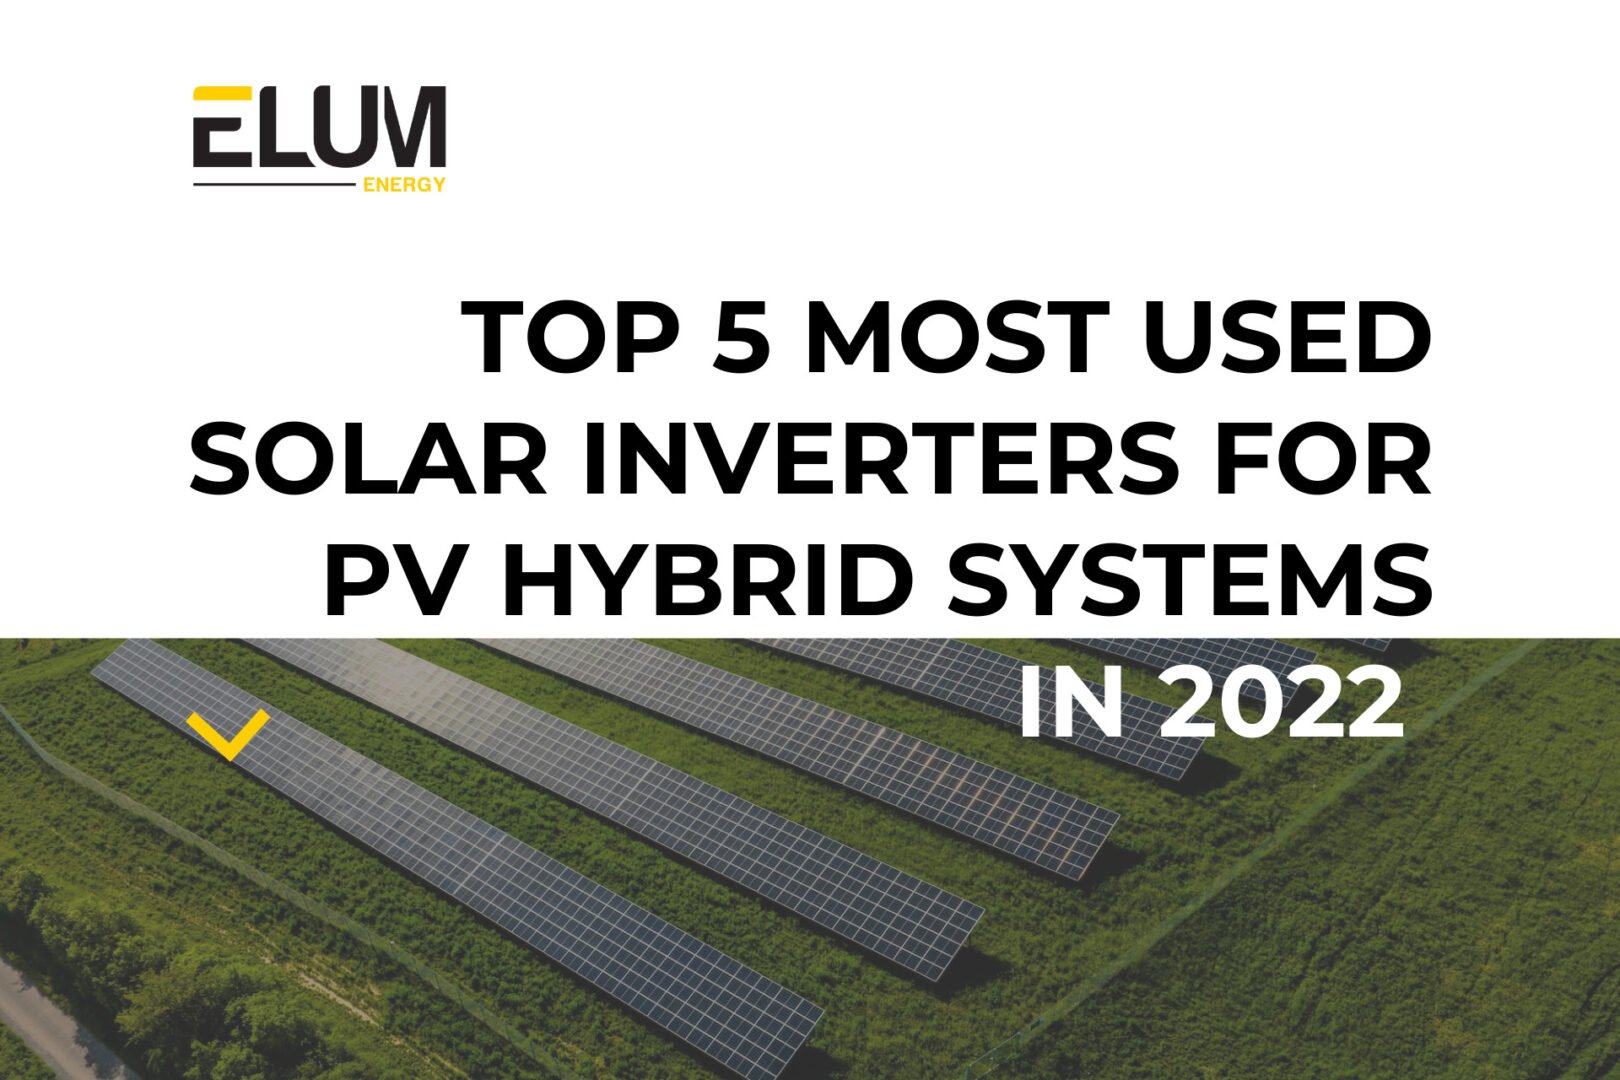 Top 5 most used solar inverters for PV hybrid systems in 2022